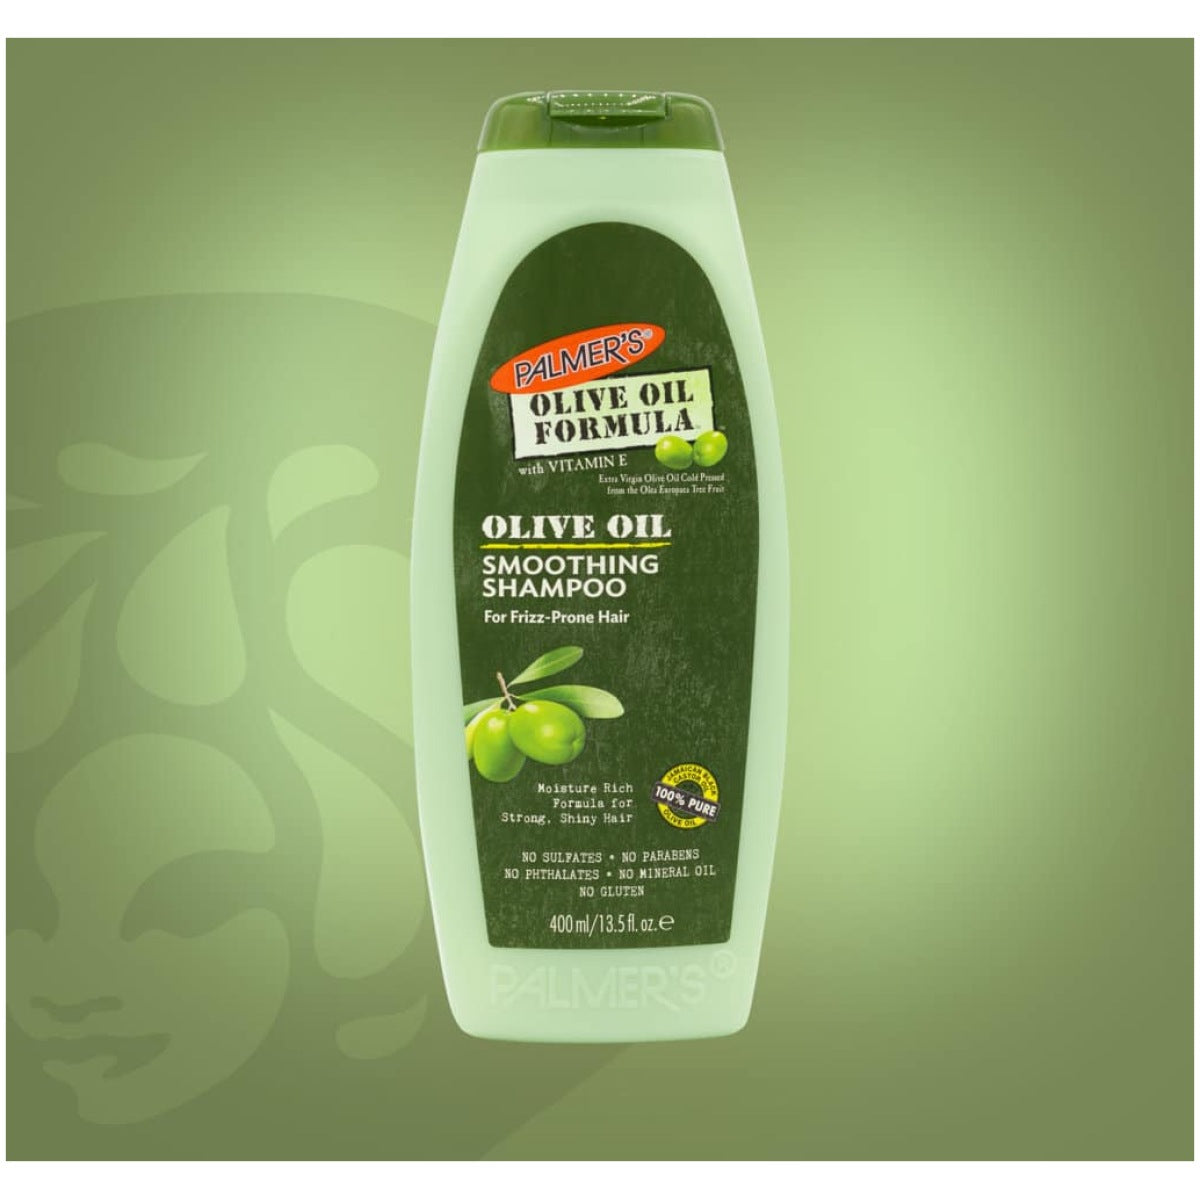 Palmer's Olive Oil Formula Smoothing Shampoo for Frizz-Prone Hair, 400ml